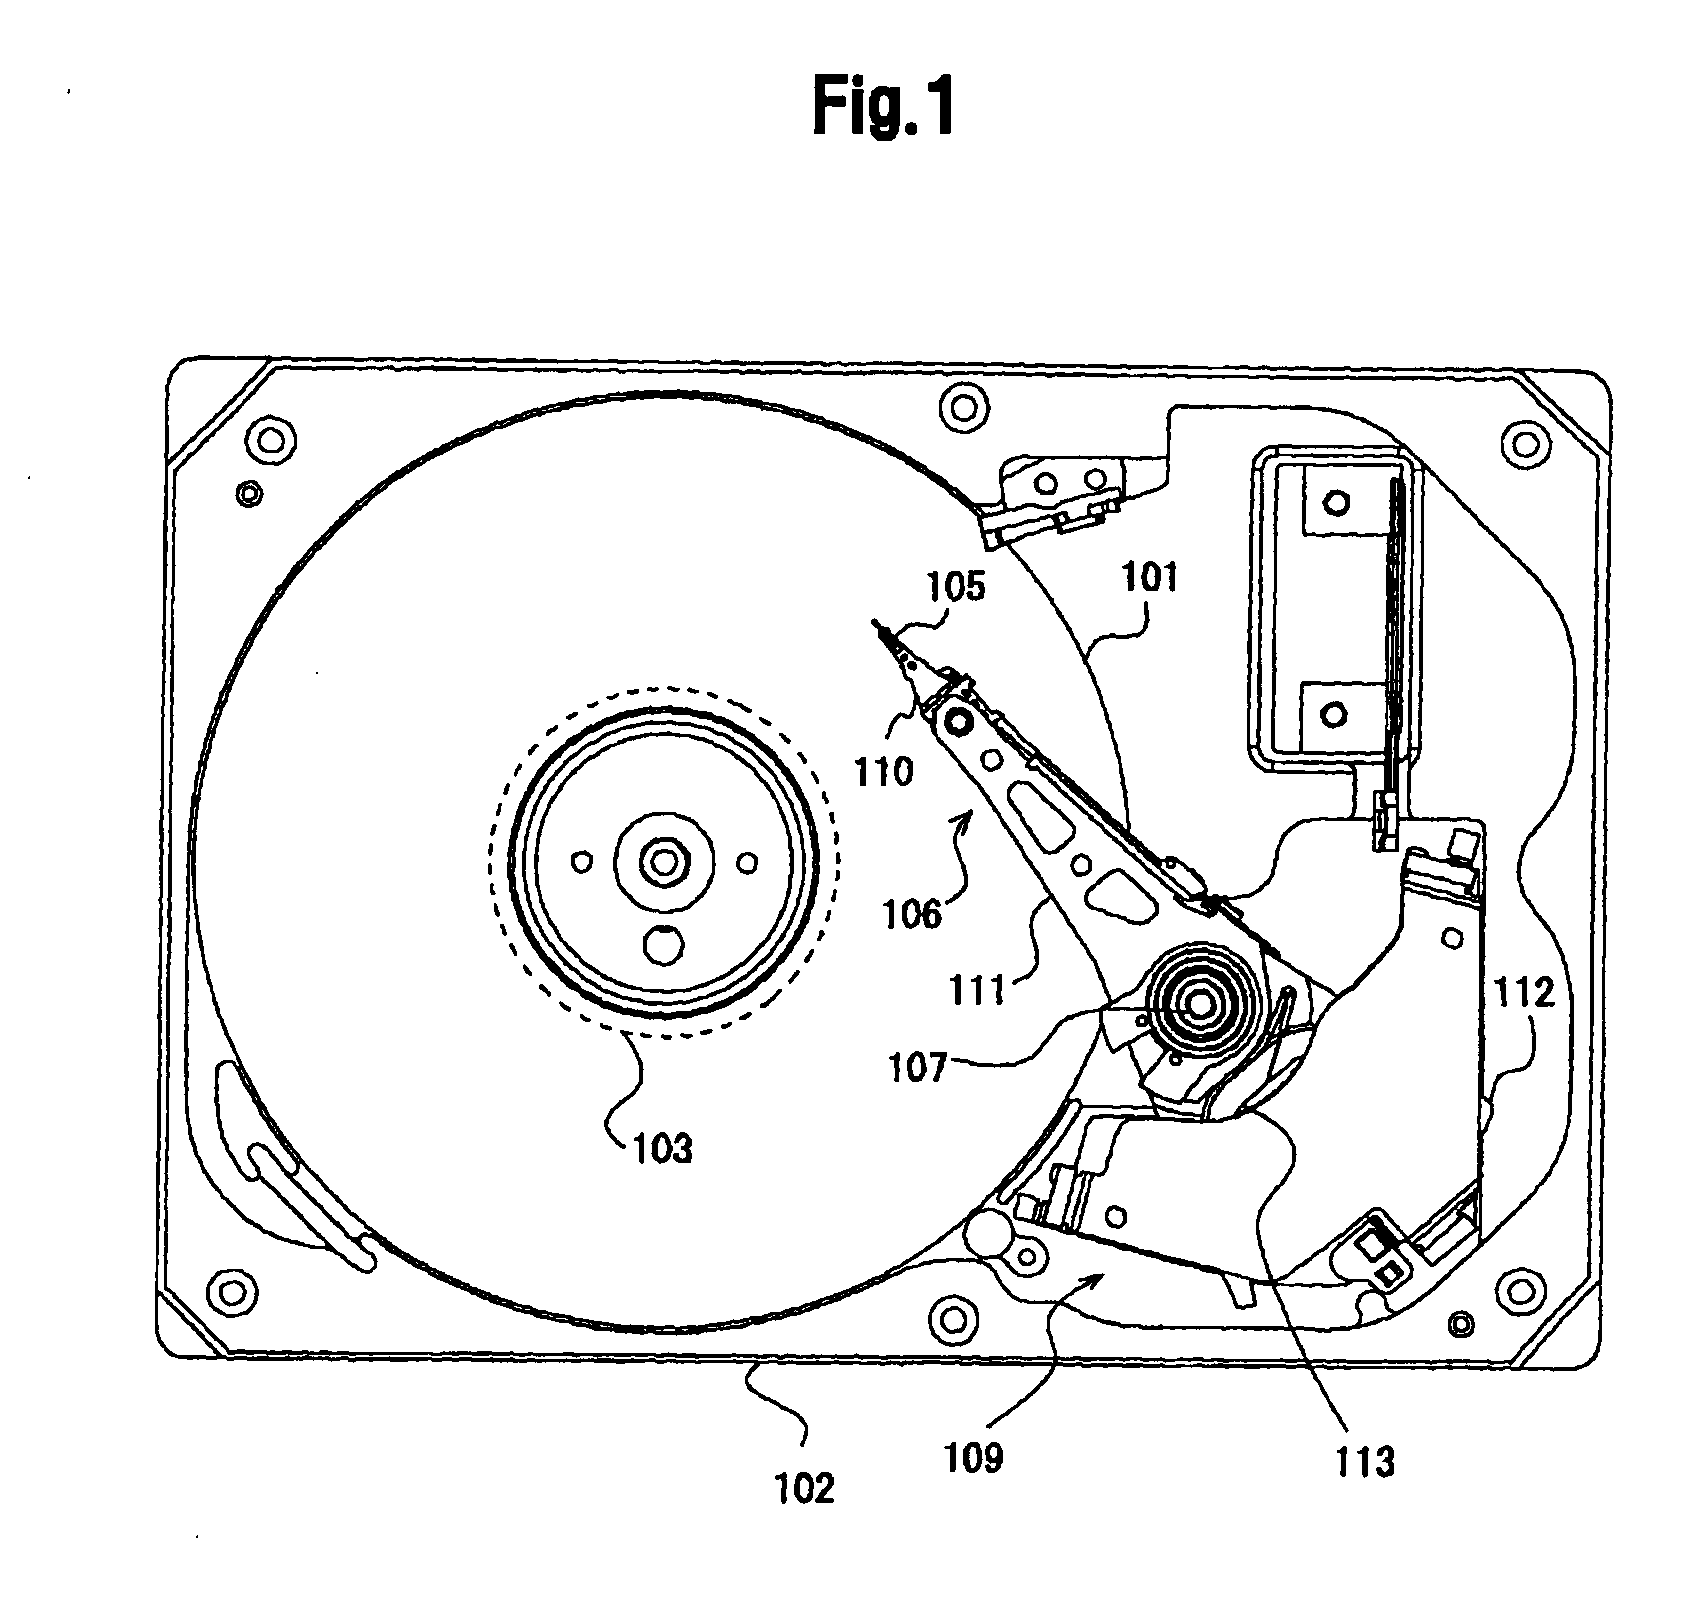 Microactuator, head gimbal assembly, and disk drive device